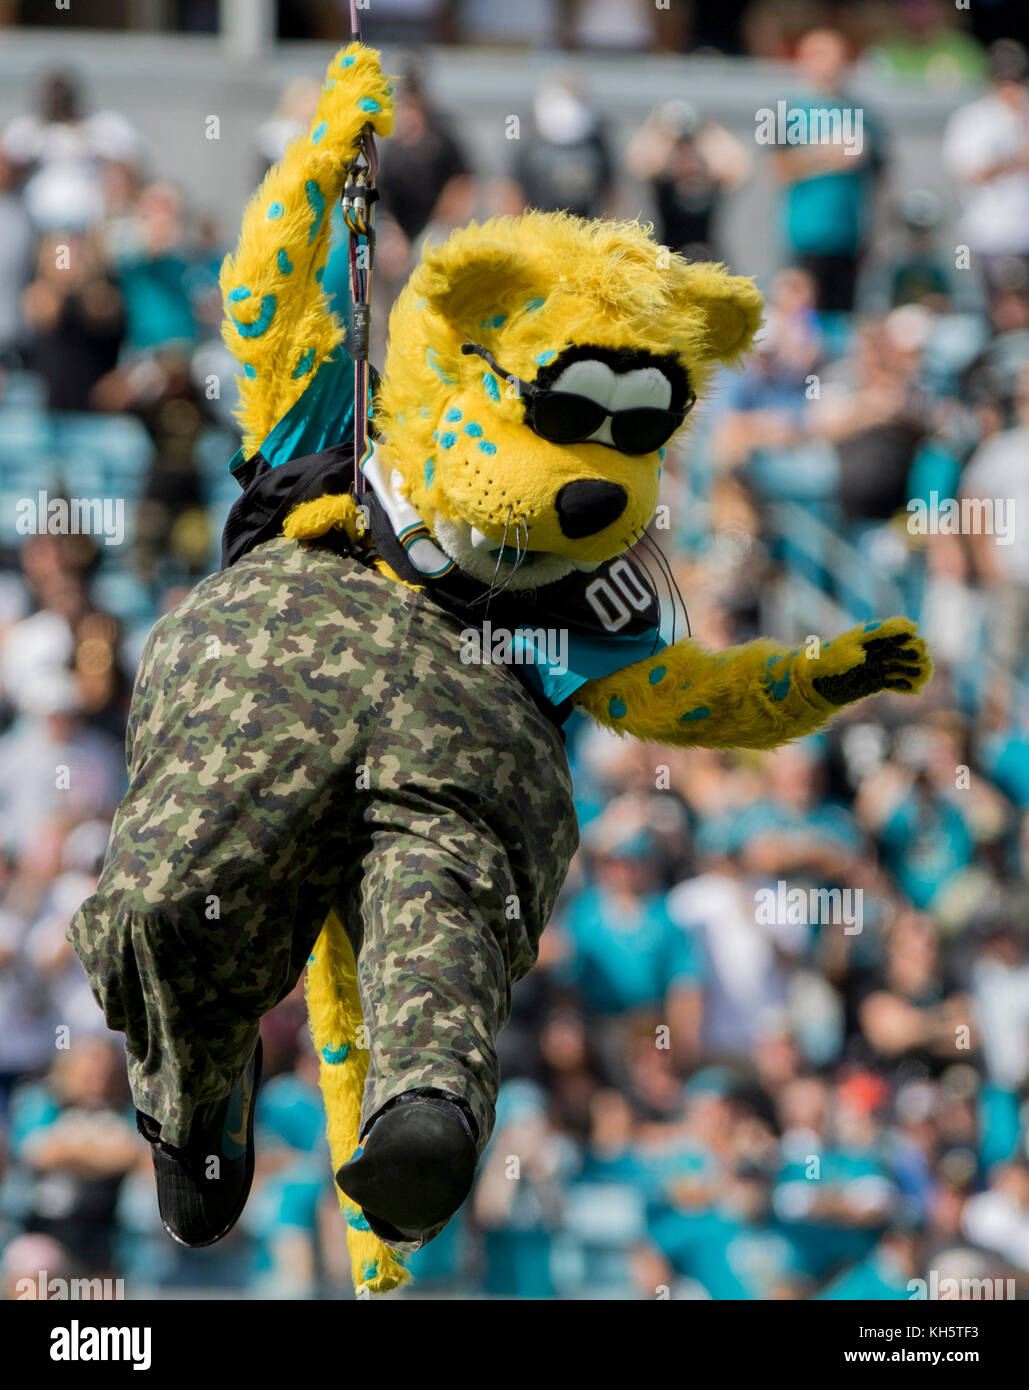 Jacksonville, FL, USA. 12th Nov, 2017. Jaguars Mascot Jaxson zip lines to the field before the NFL football game between the Los Angeles Chargers and the Jacksonville Jaguars at EverBank Field in Jacksonville, FL. Jacksonville defeated Los Angeles 20-17 in overtime Robert John Herbert/CSM/Alamy Live News Stock Photo